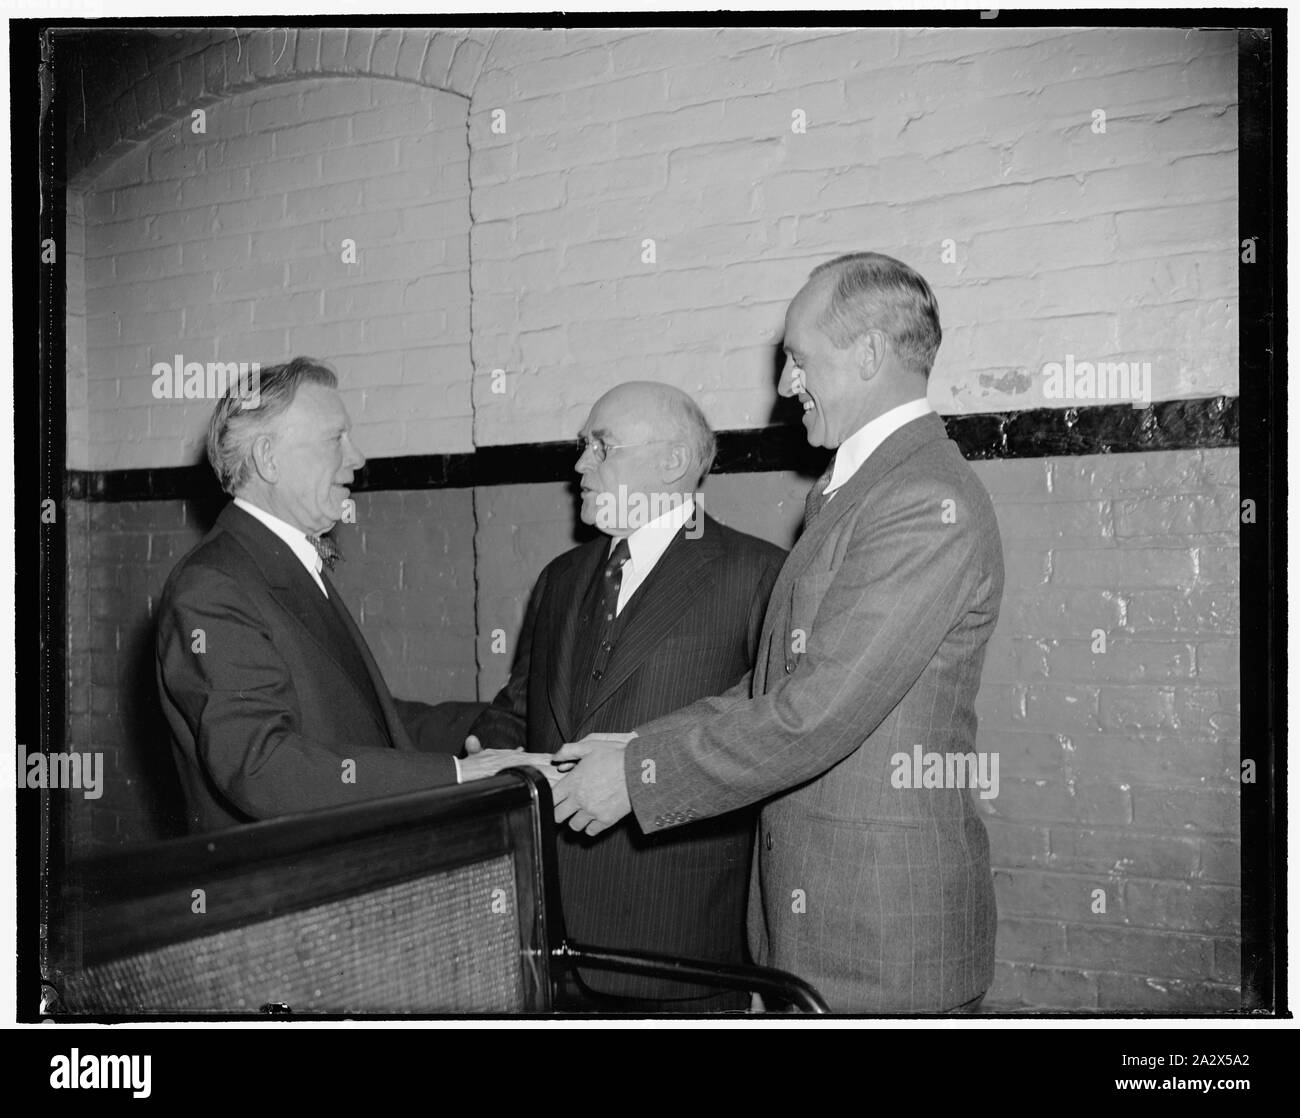 Returning Senators greet one another. Washington, D.C., Jan. 3. Republican Senator William E. Borah, left, seemed happy to see Democratic Senator John H. Bankhead, center, and Millard E. Tydings, as he met them in the Senate subway on their way to today's opening session of the 76th Congress Stock Photo